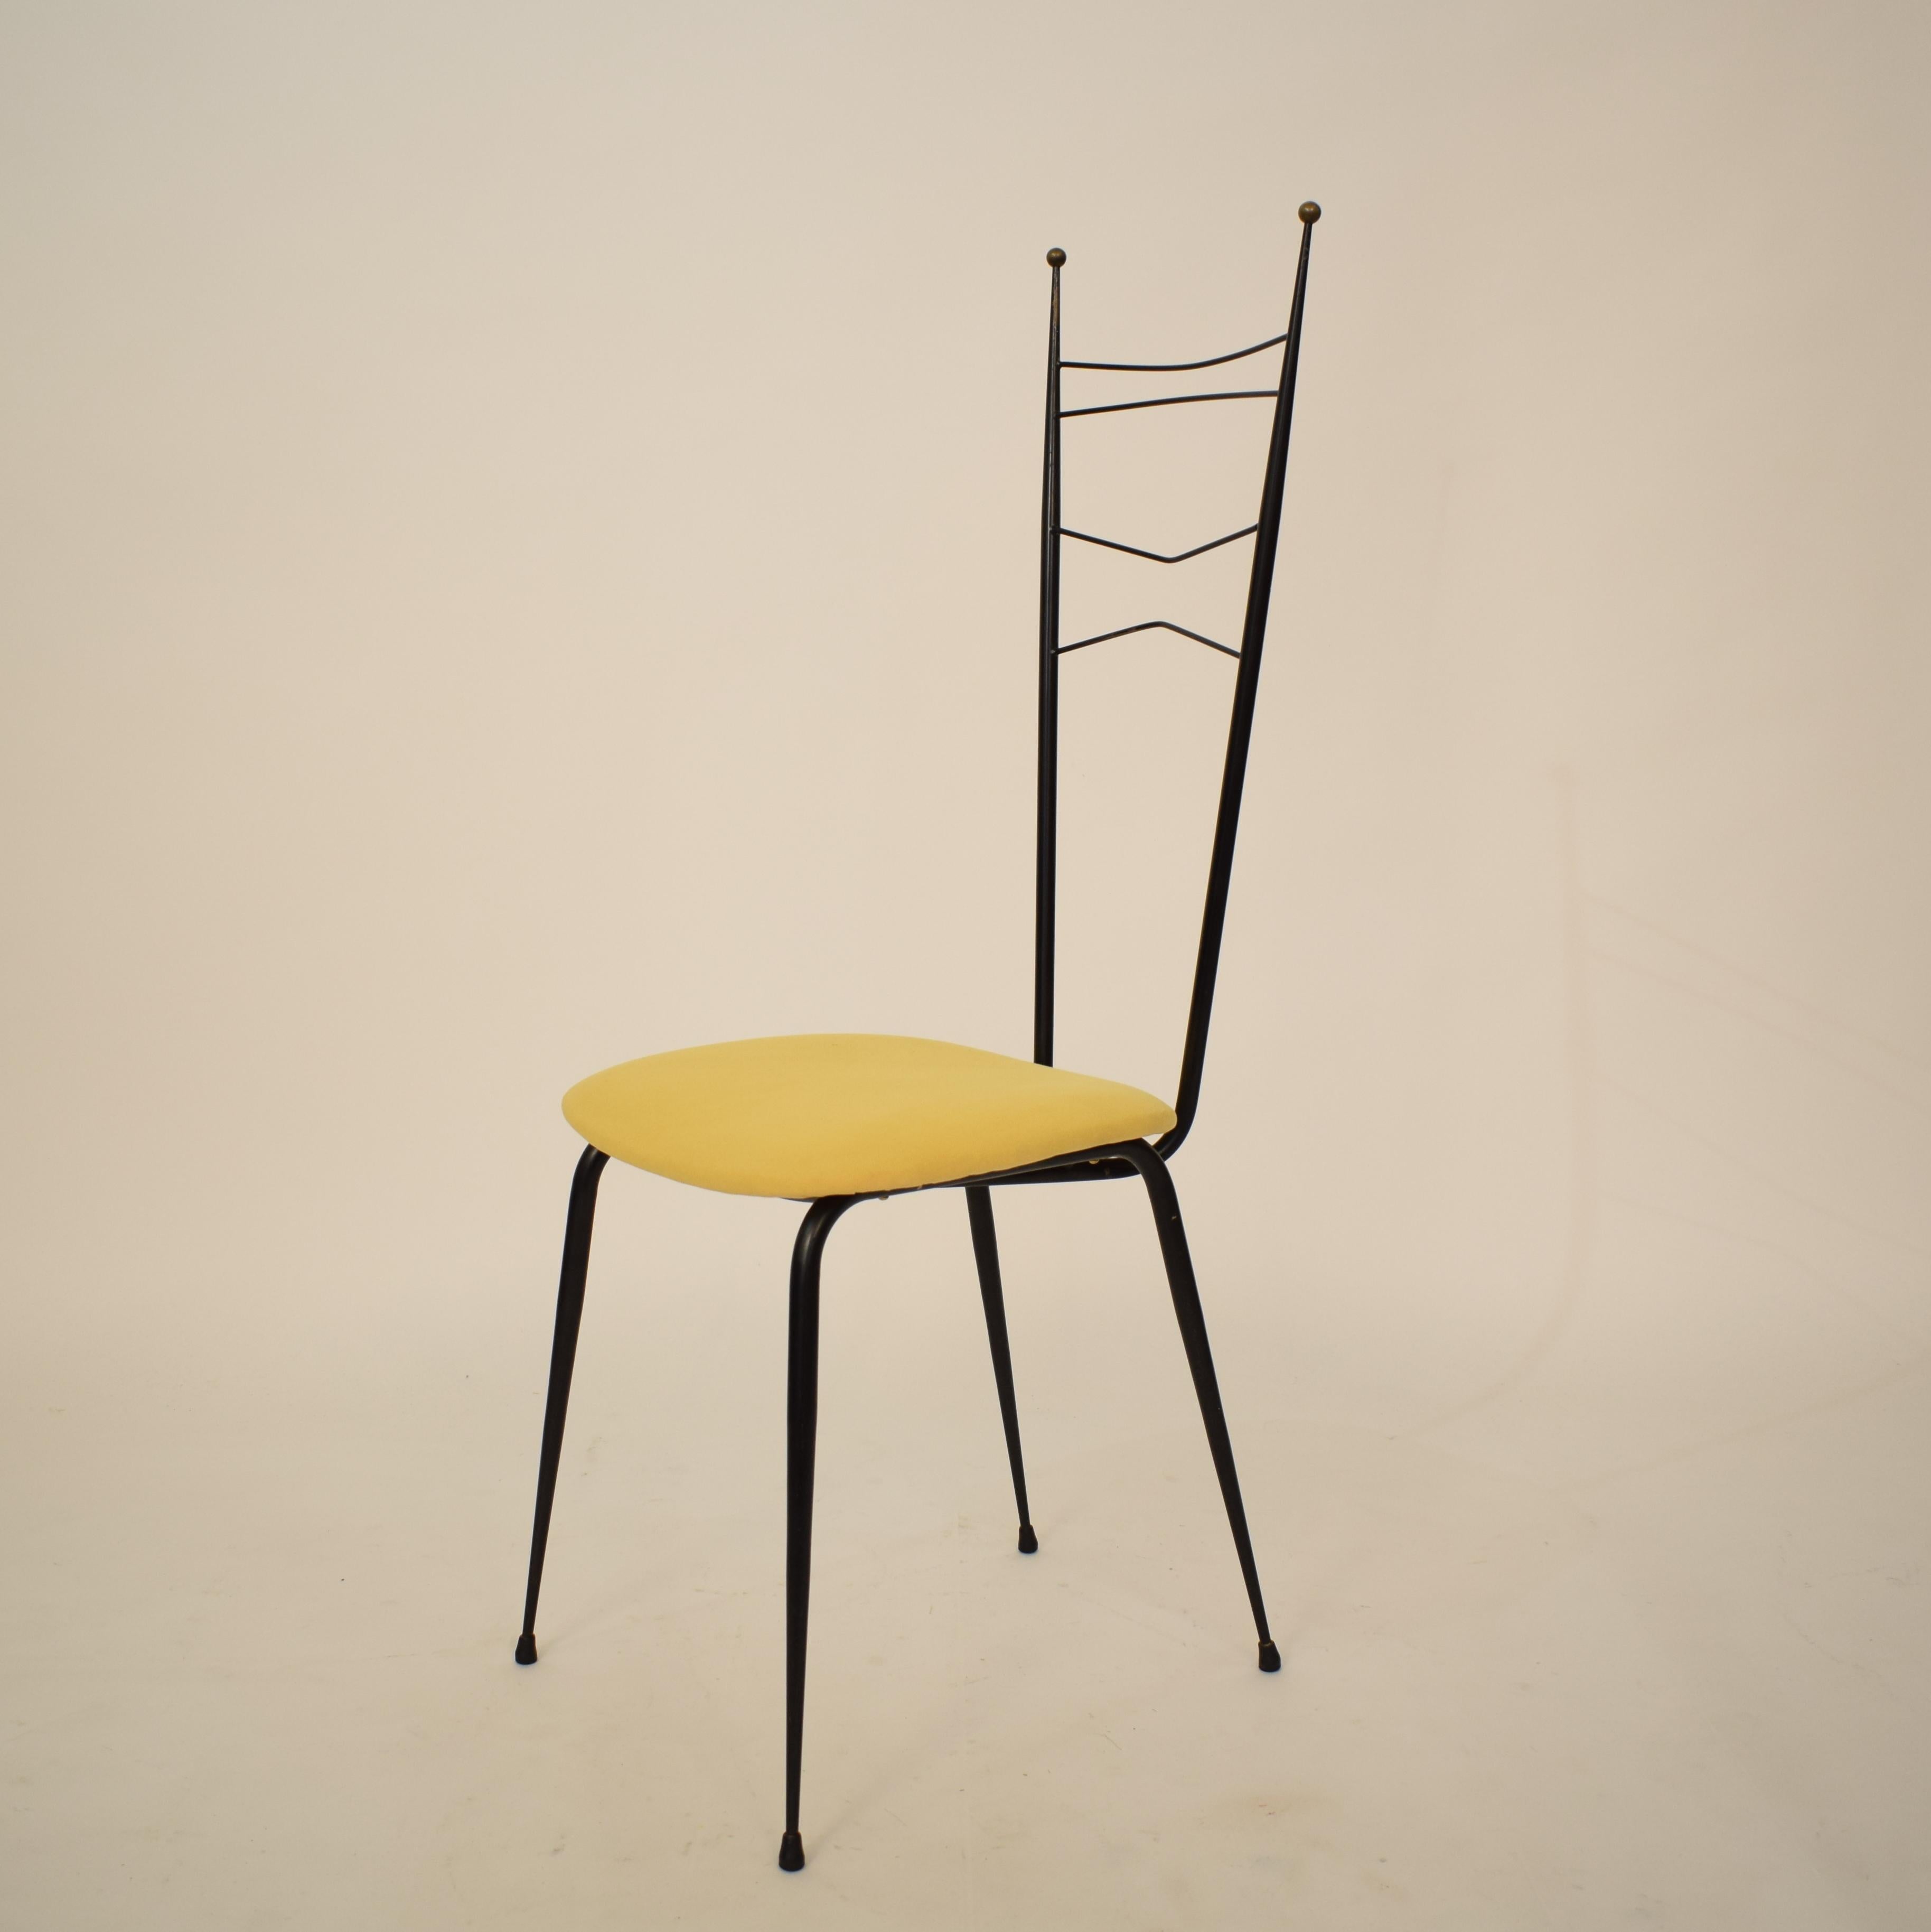 Lacquered Midcentury Italian Black and Yellow Dining Chairs Attributed to Ico Parisi, 1958